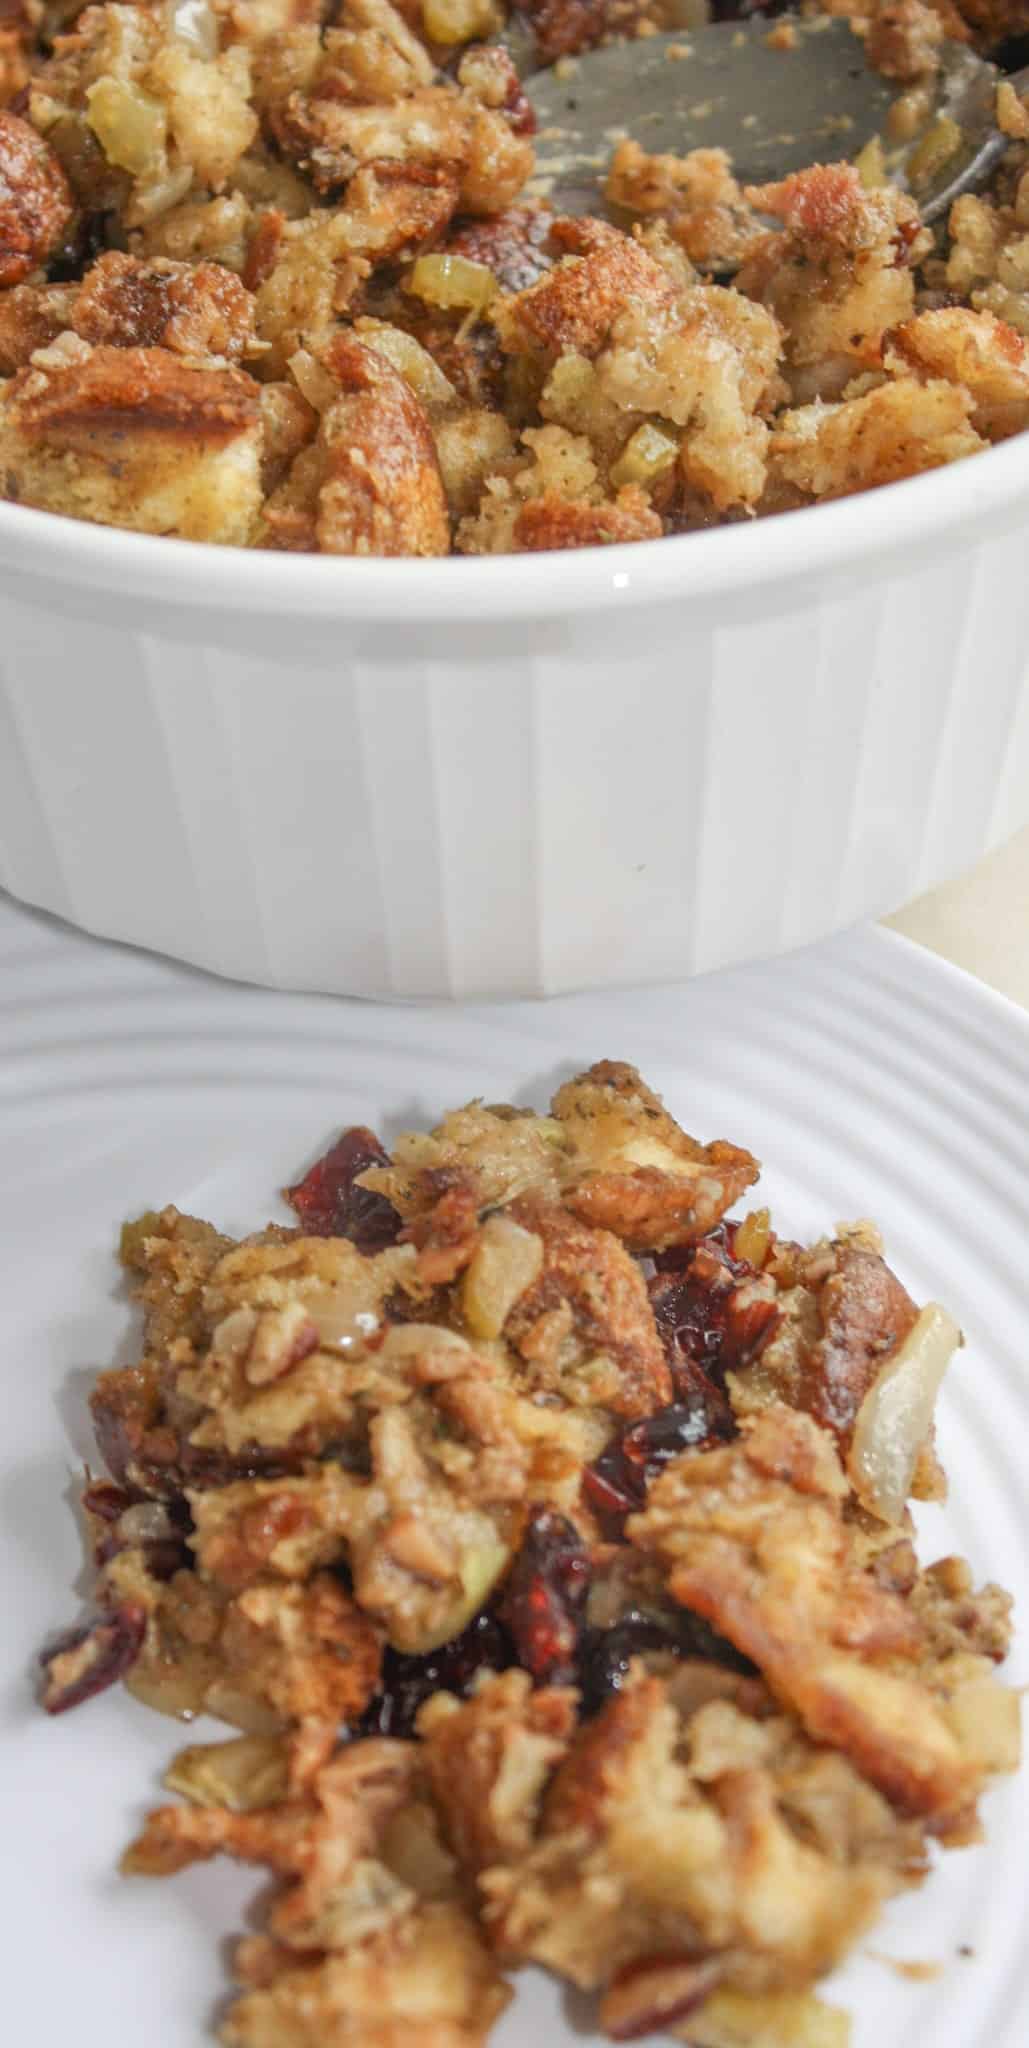 Instant Pot Festive Stuffing is a twist on my traditional stuffing.  This gluten free stuffing has the added flavours of dried cranberries, bacon and pecans.